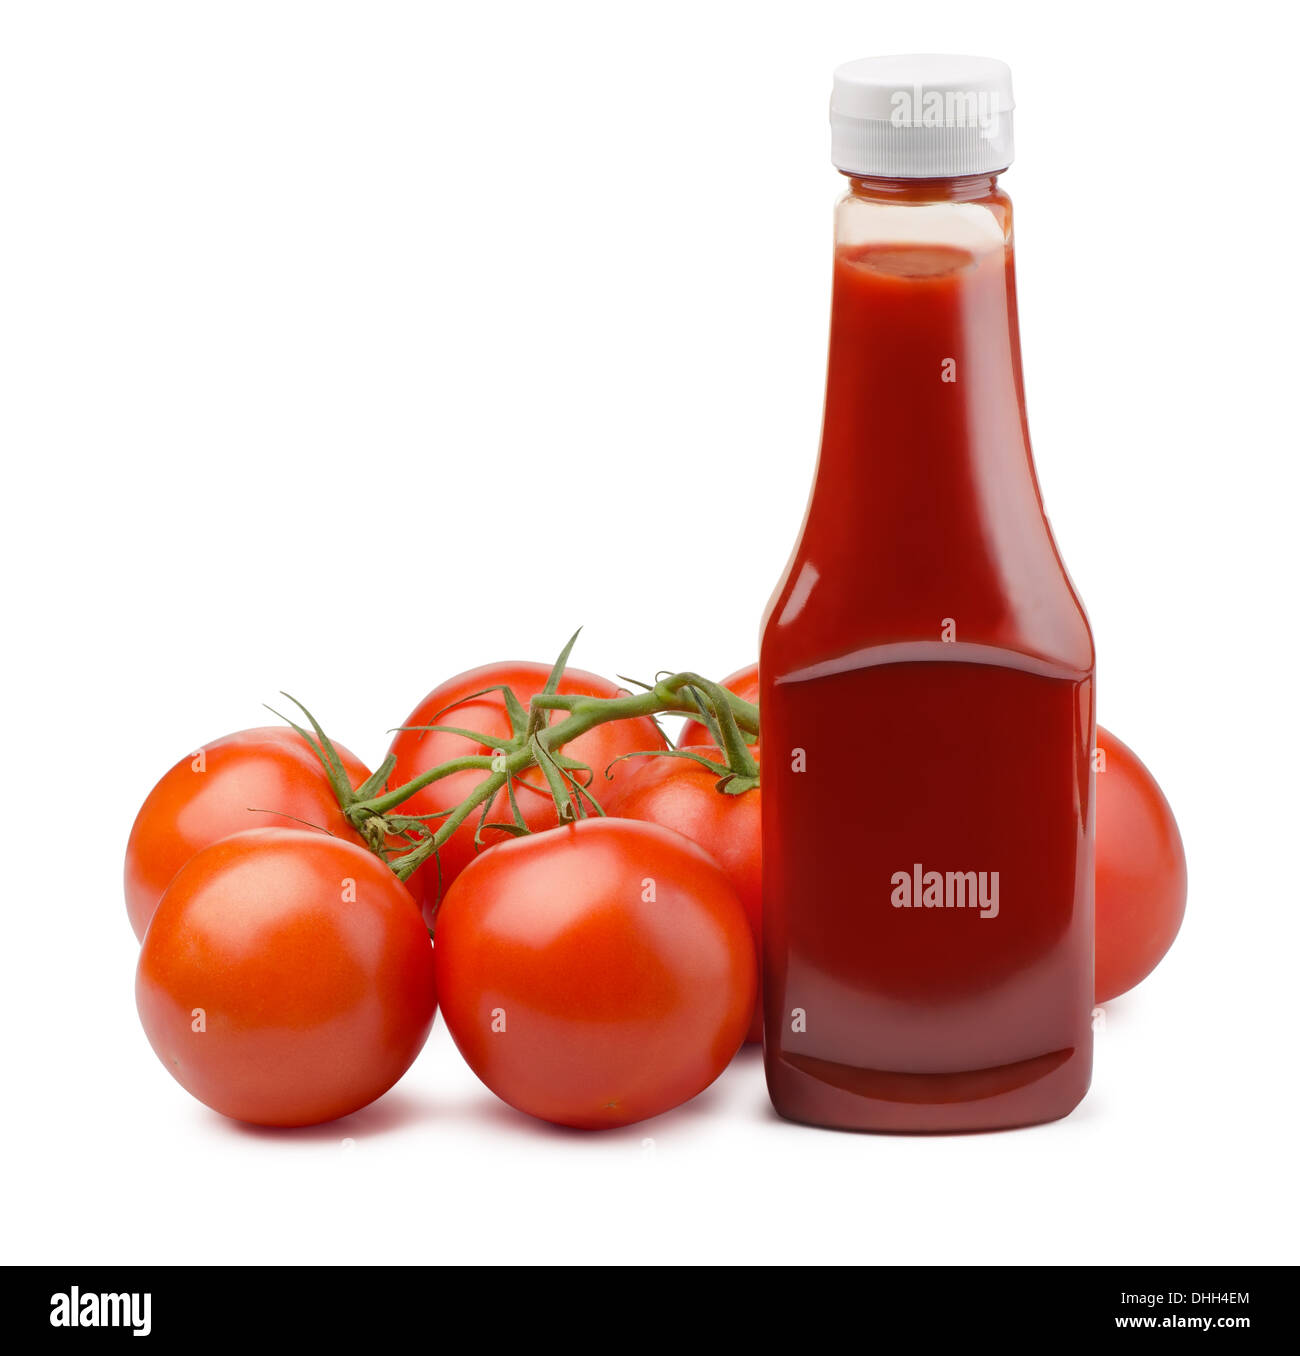 Ketchup bottle and fresh tomatoes isolated on white Stock Photo